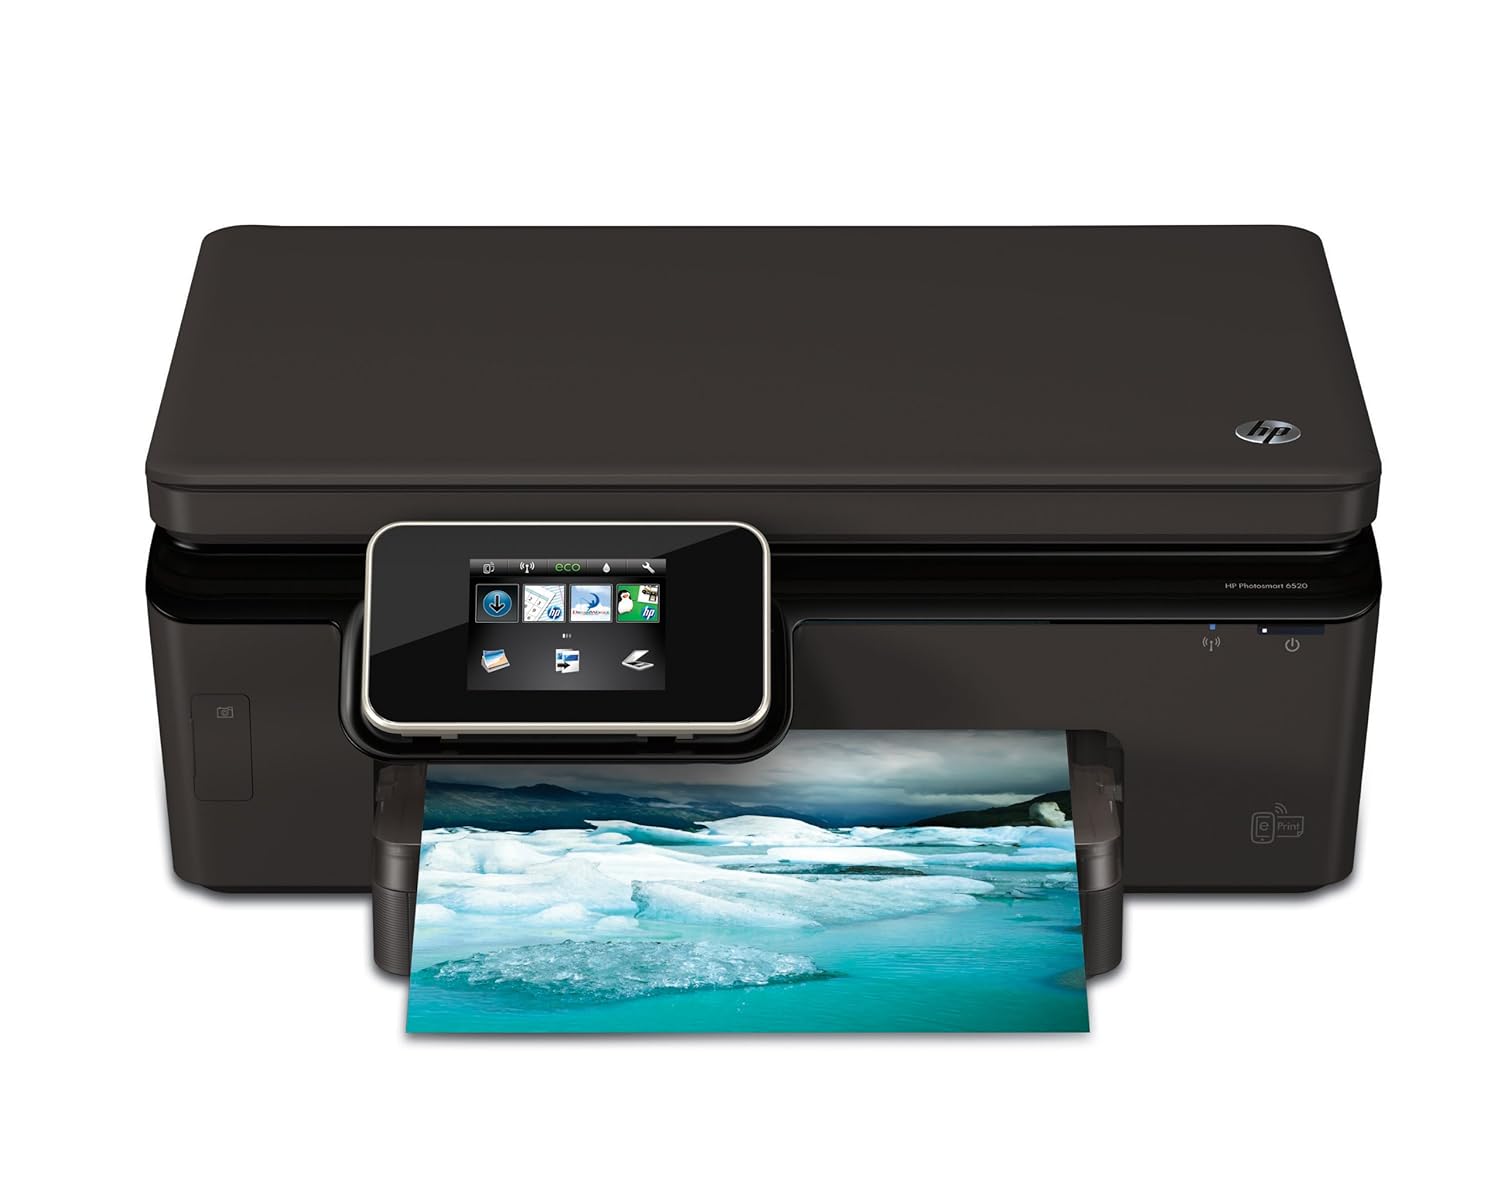 HP Photosmart 6520 e-All-in-One Tintenstrahl